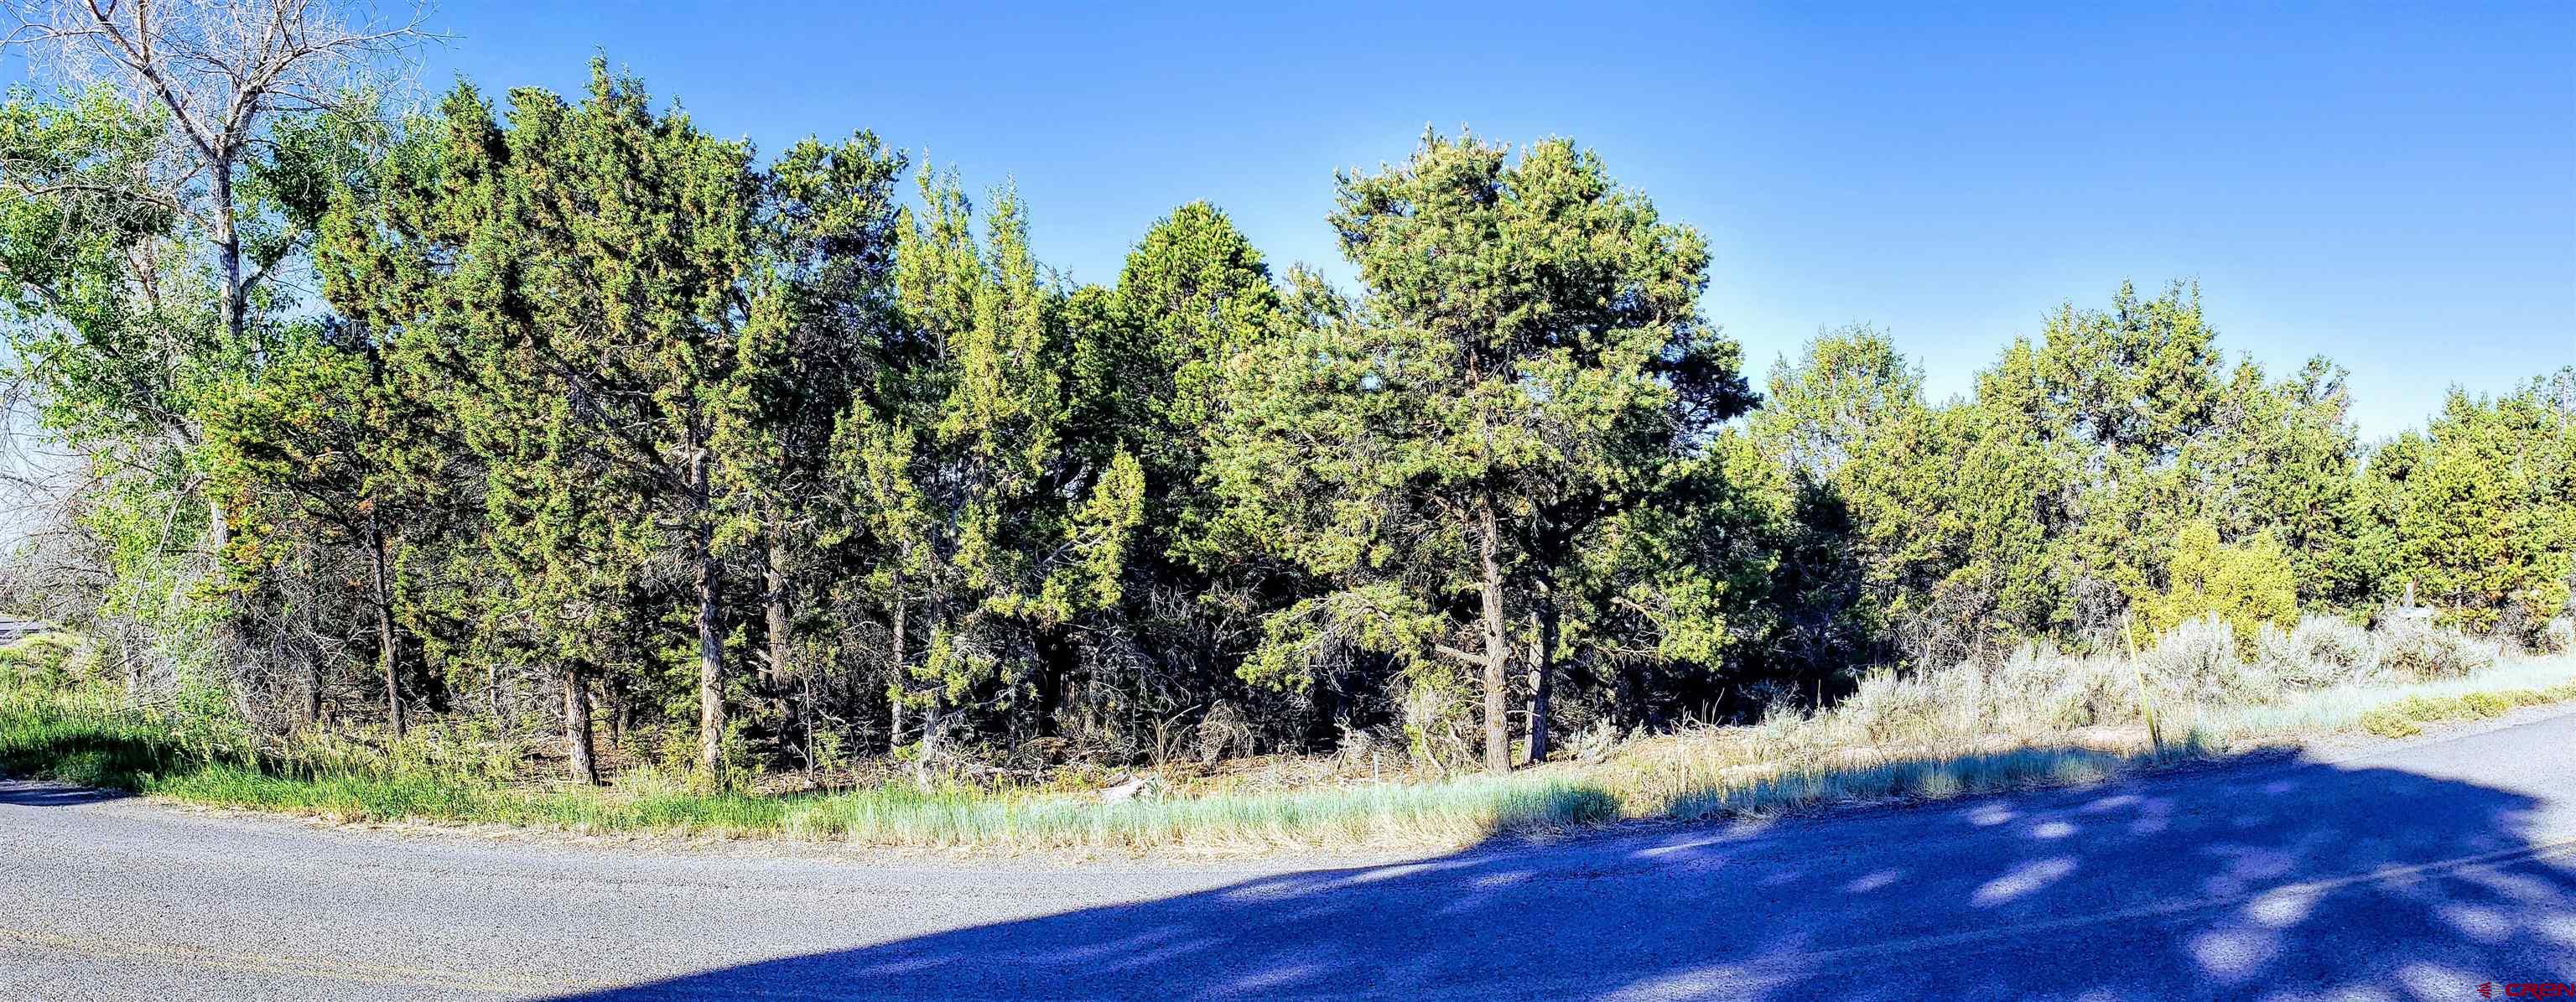 Desirable 34+ acres located above Cedaredge with Top of the World Panoramic views. This lot would be an ideal place to build a custom home with utilities very near. The topography is gently sloped but enough to build a walk-out basement. The property is mostly wooded with pinion pine and cedar trees. Giant Mule deer and turkeys grace the property often. Views of the Grand Mesa are indeed Grand and those also extend past the fertile valley to the San Juan Mountains, Black Canyon of the Gunnison, and the Uncompahgre  Plateau. This would also make a good getaway property to camp or build a cabin on and enjoy the peace and solitude this land could offer. Paved NO-OUTLET county road provides easy access with minimal traffic. 7+/- Elevation and less then 10 minutes to Cedaredge. Convenient National forest access and access to world class recreation in any direction! NO HOA or Covenants.